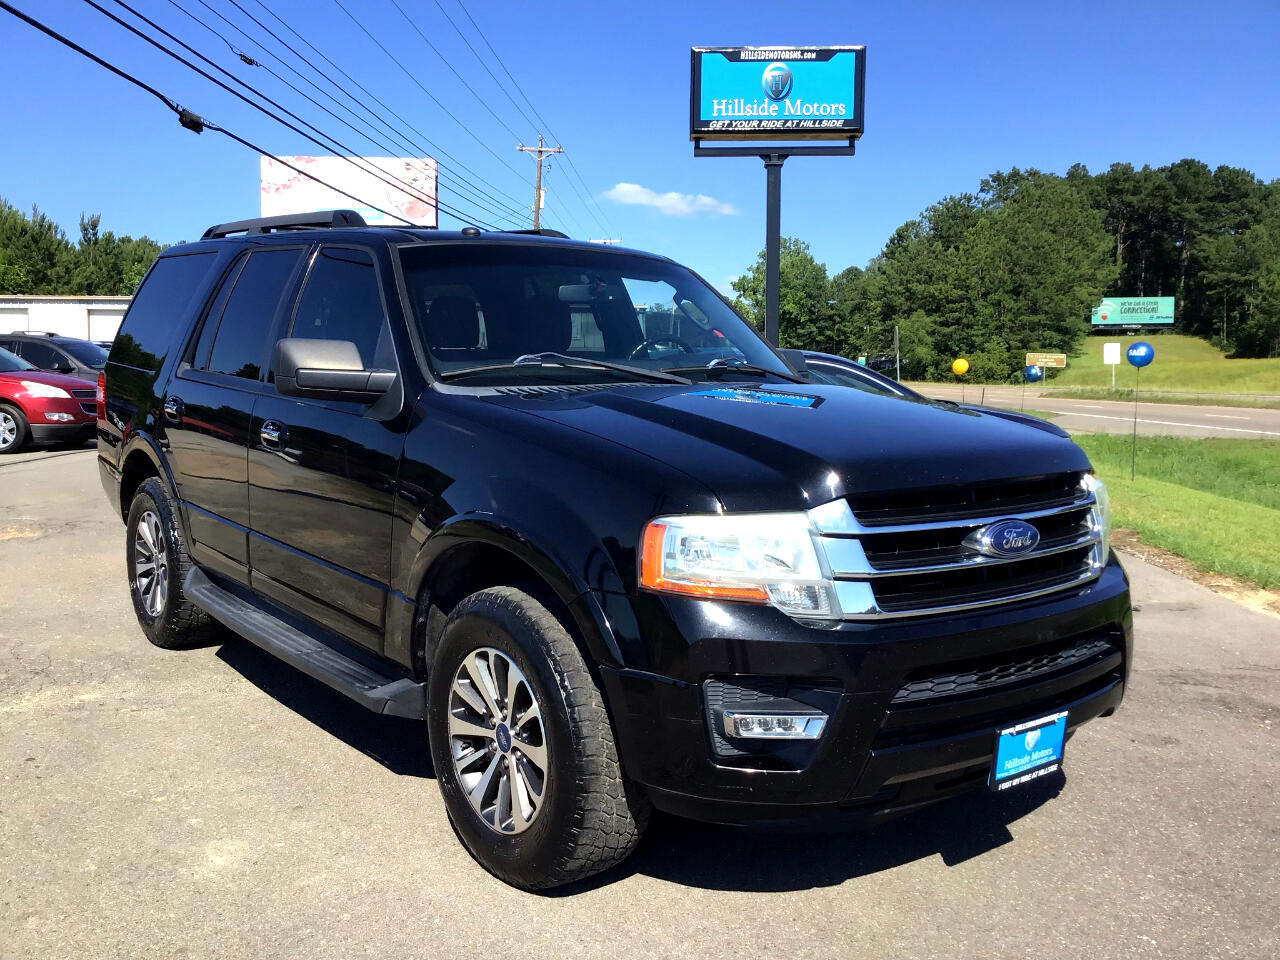 2016 Ford Expedition XLT 2WD